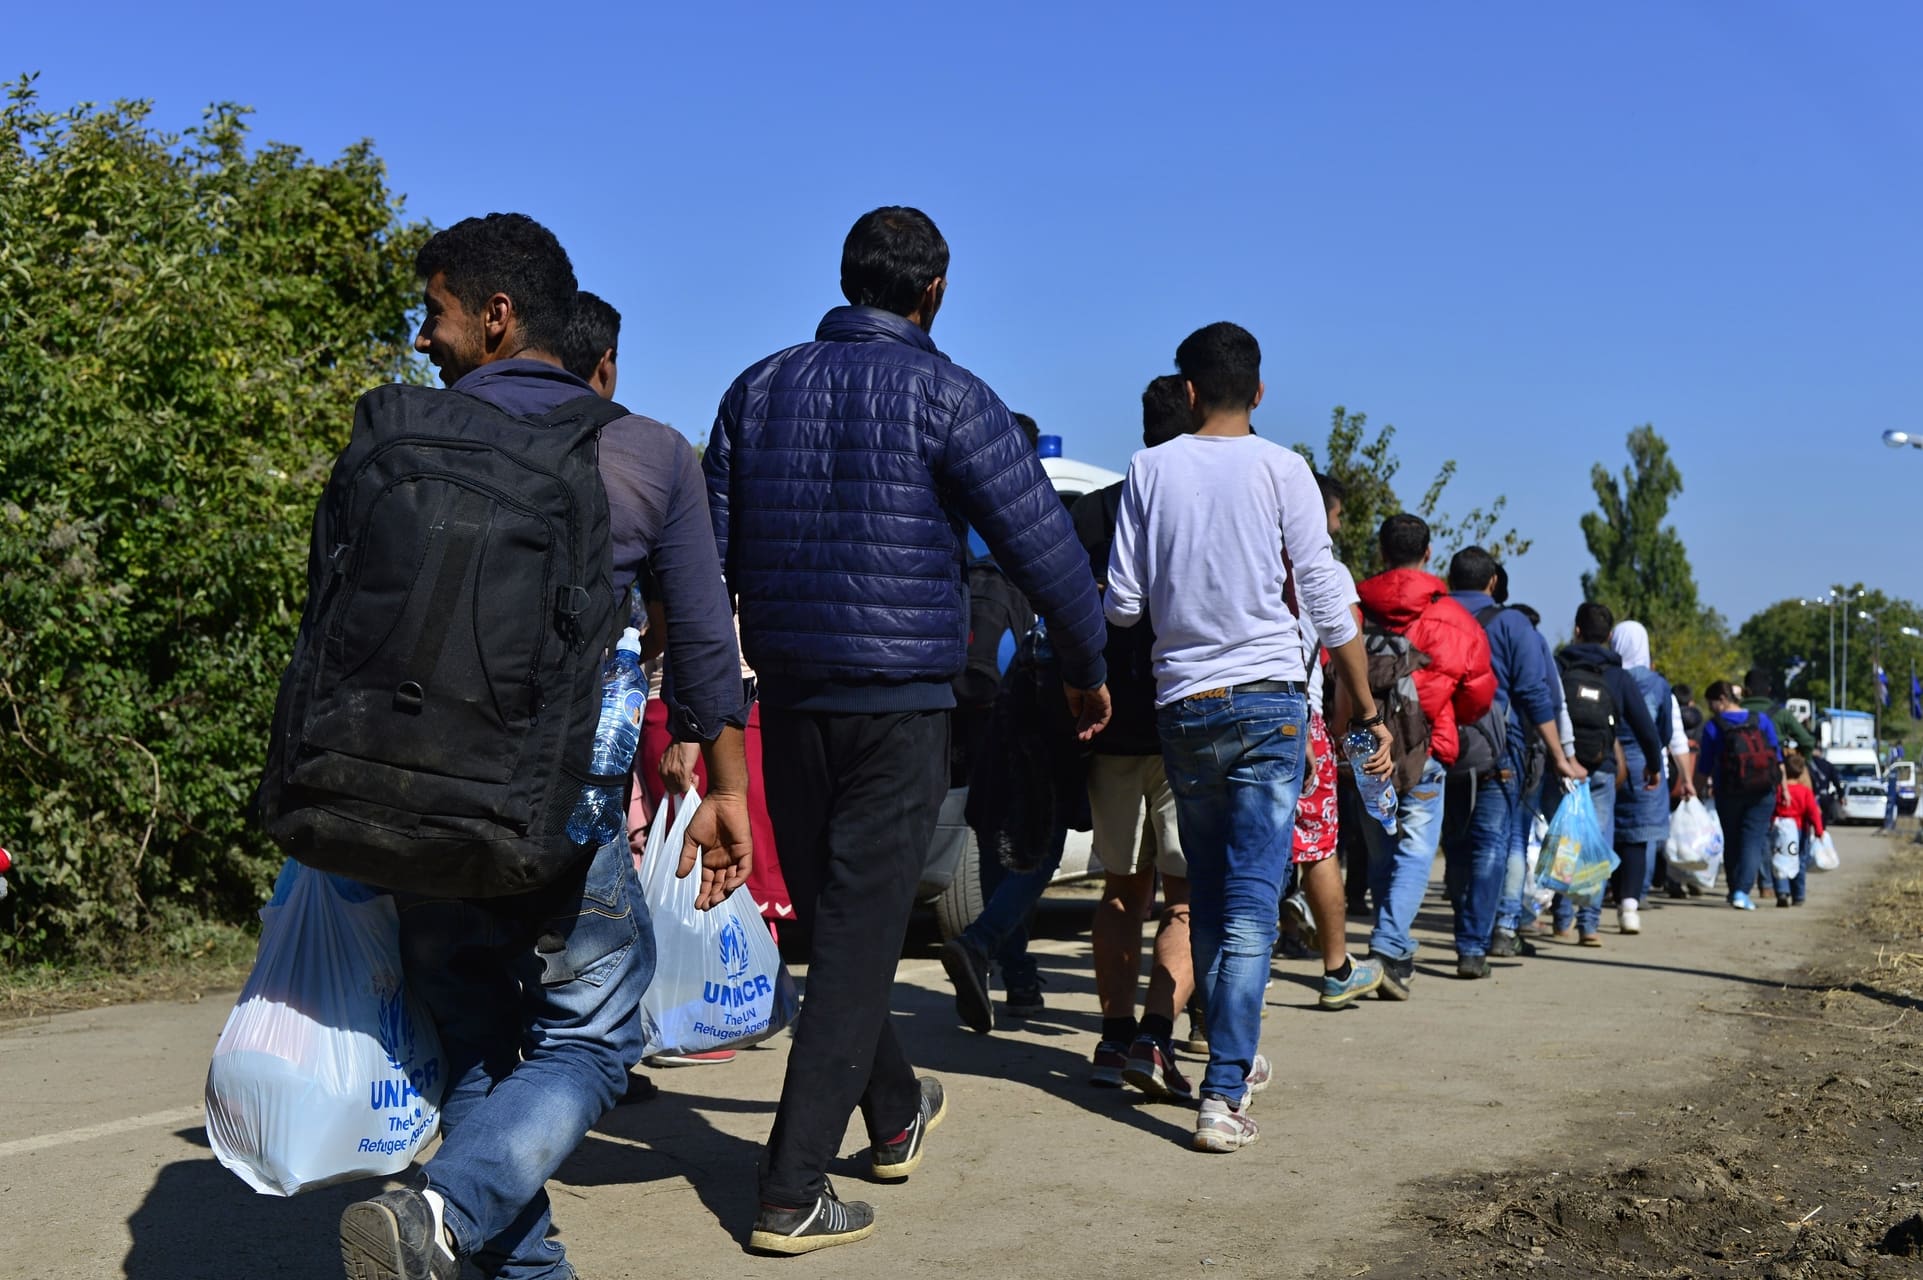 October 4, 2015; Bapska in Serbia. Photo of refugees leaving Serbia. They came to Bapska by buses and then they leaving Serbia and go to Croatia and then to Germany. Now they are waiting for entering EU in Croatia. October 4, 2015; Bapska in Serbia.